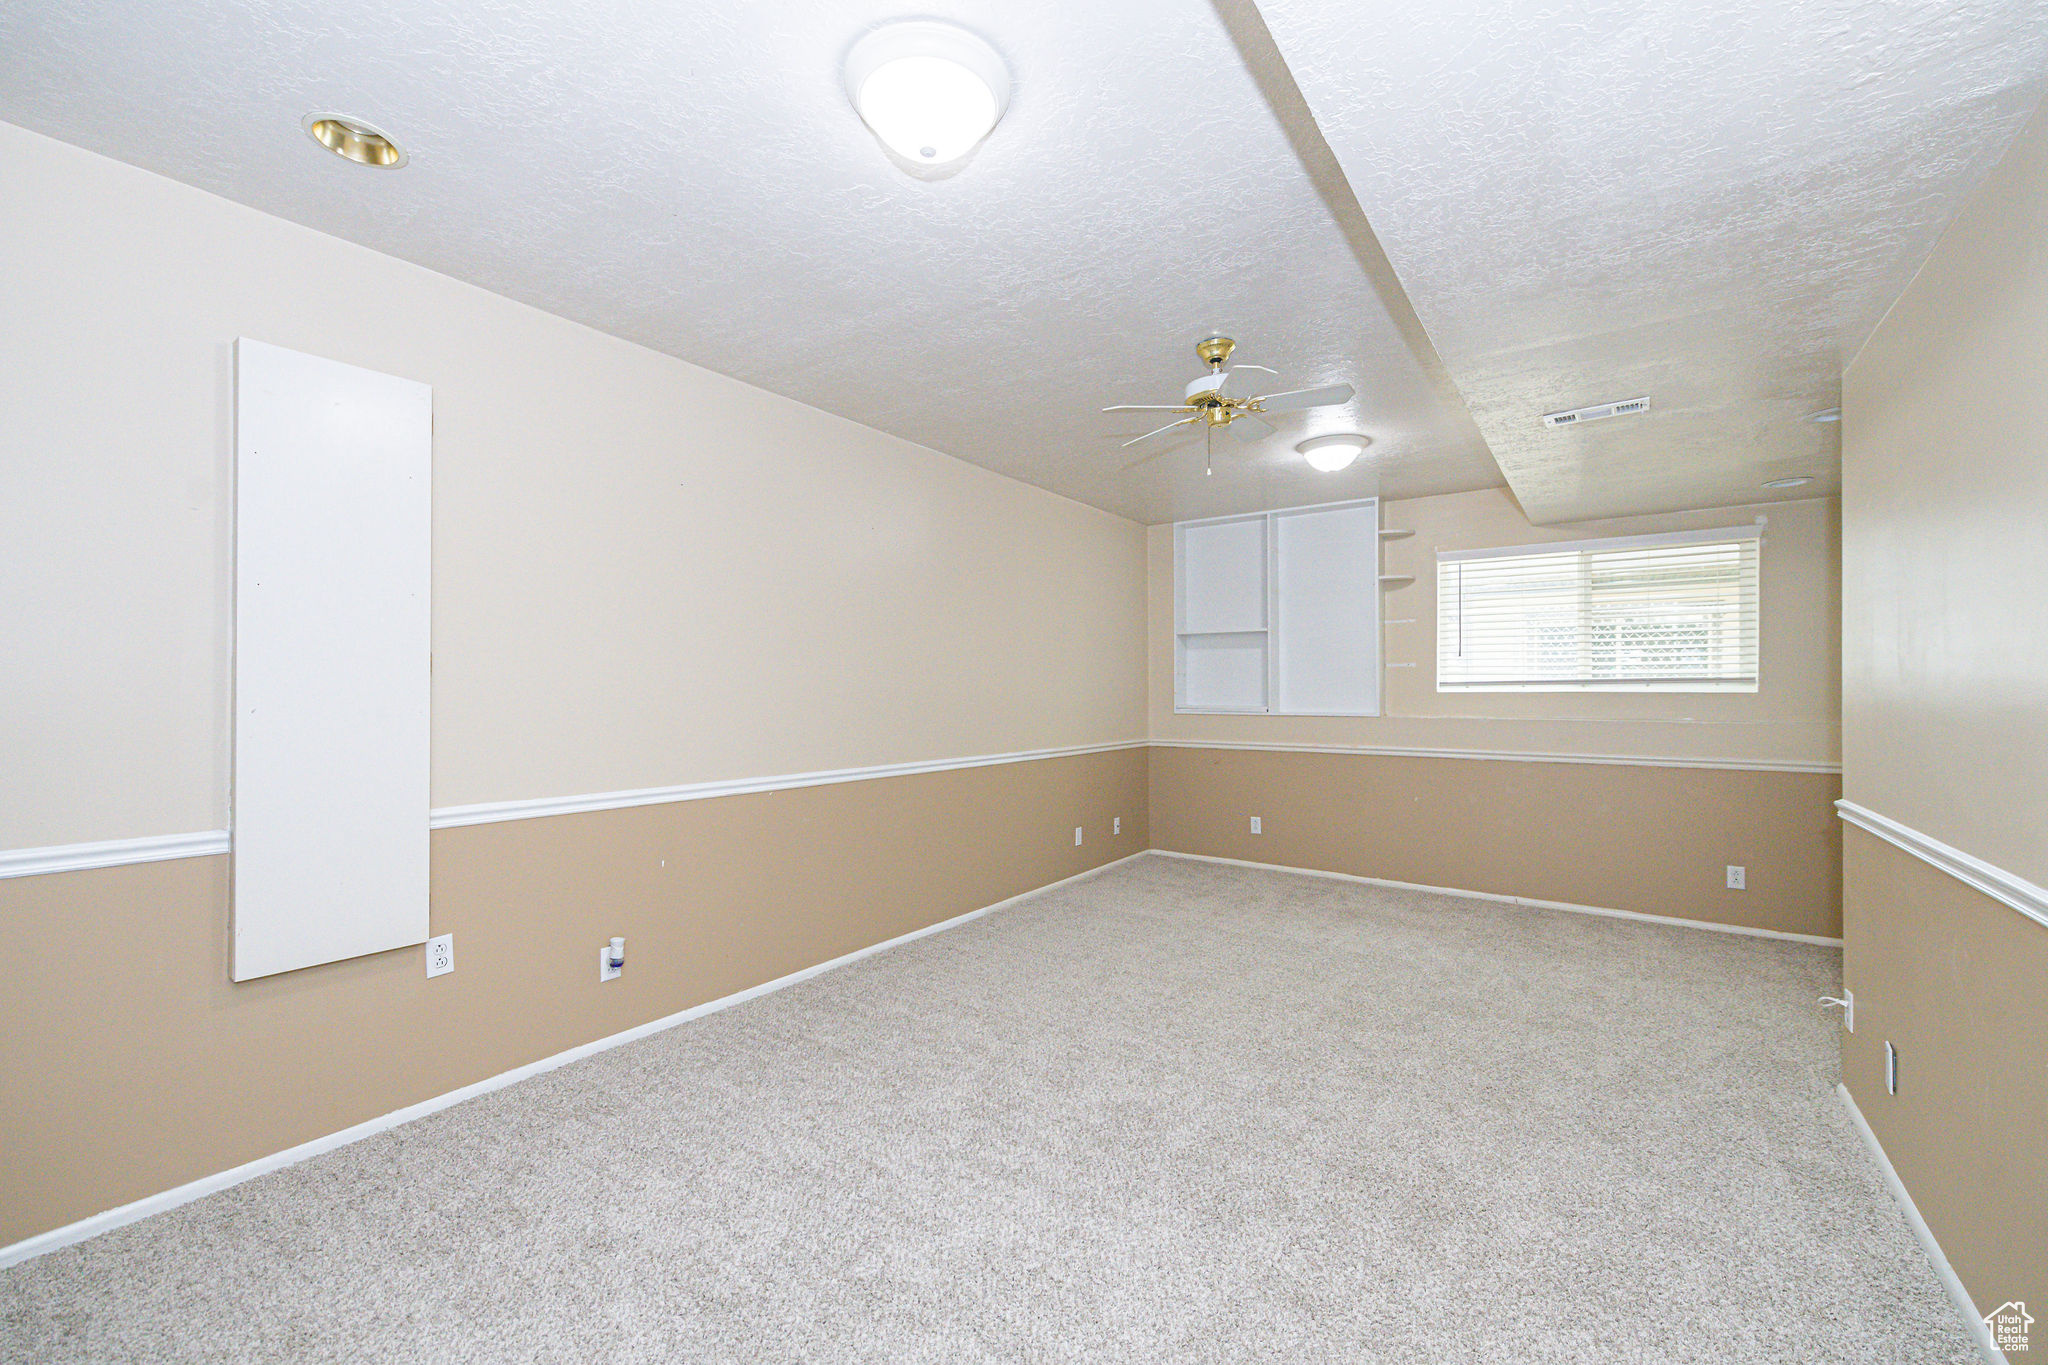 Unfurnished room featuring light carpet, ceiling fan, and a textured ceiling